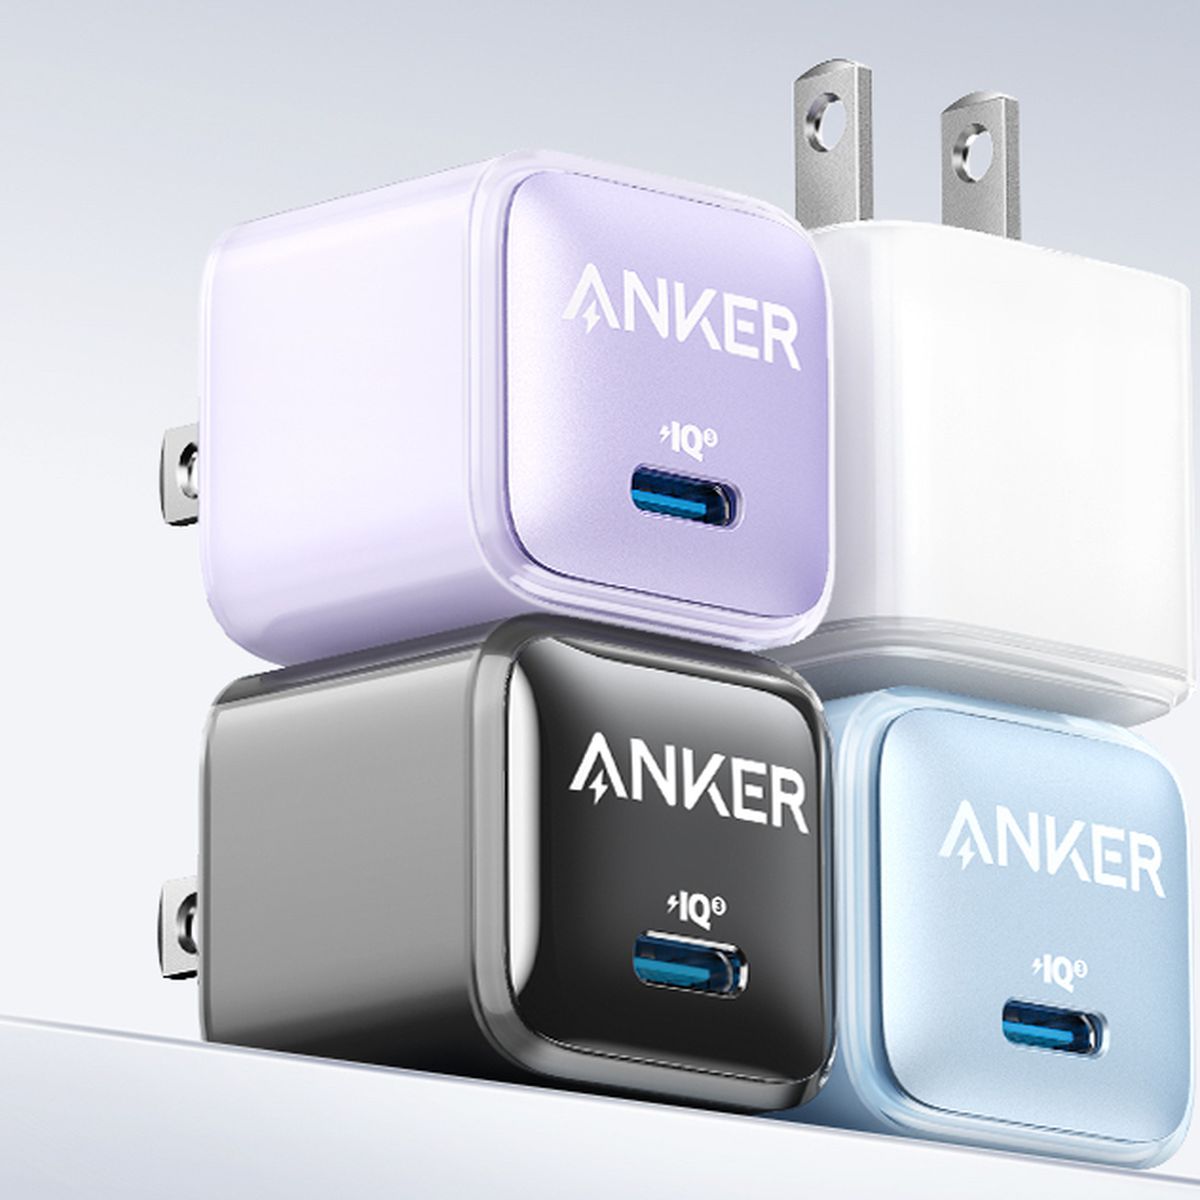 Anker Refreshes Its 20W Adapter Lineup With Colorful Anker Nano Pro -  MacRumors